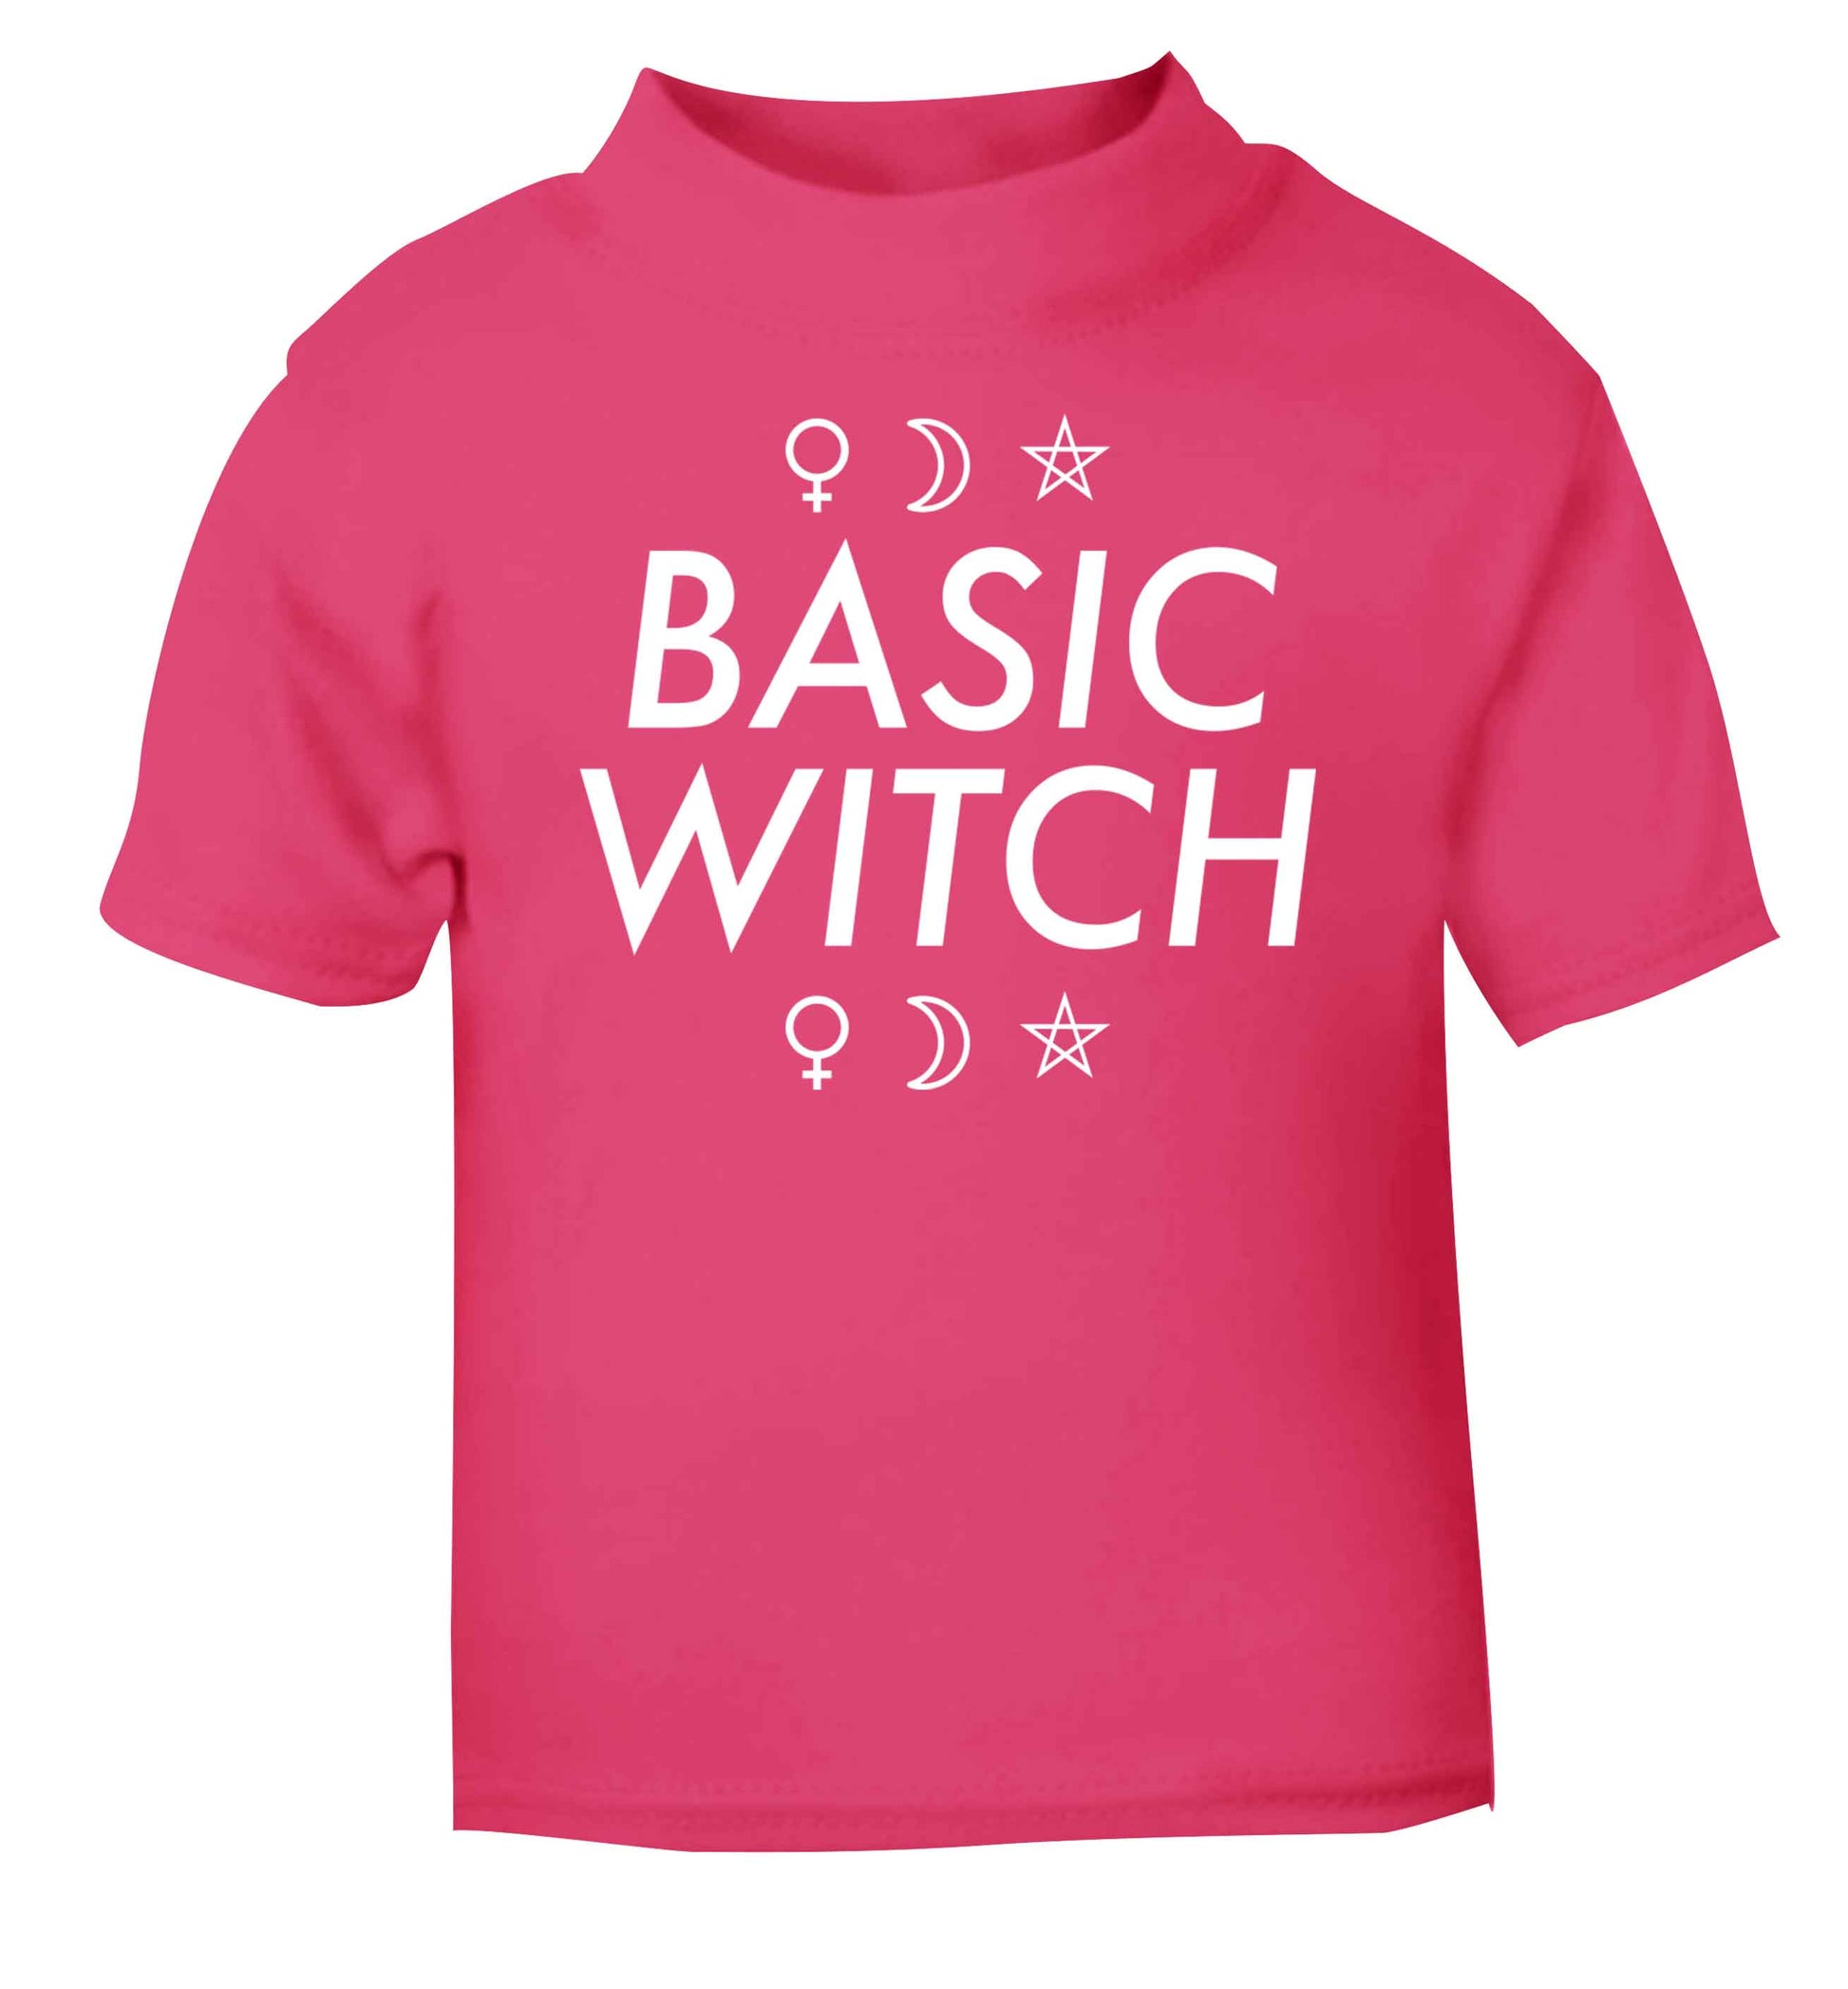 Basic witch 1 pink baby toddler Tshirt 2 Years